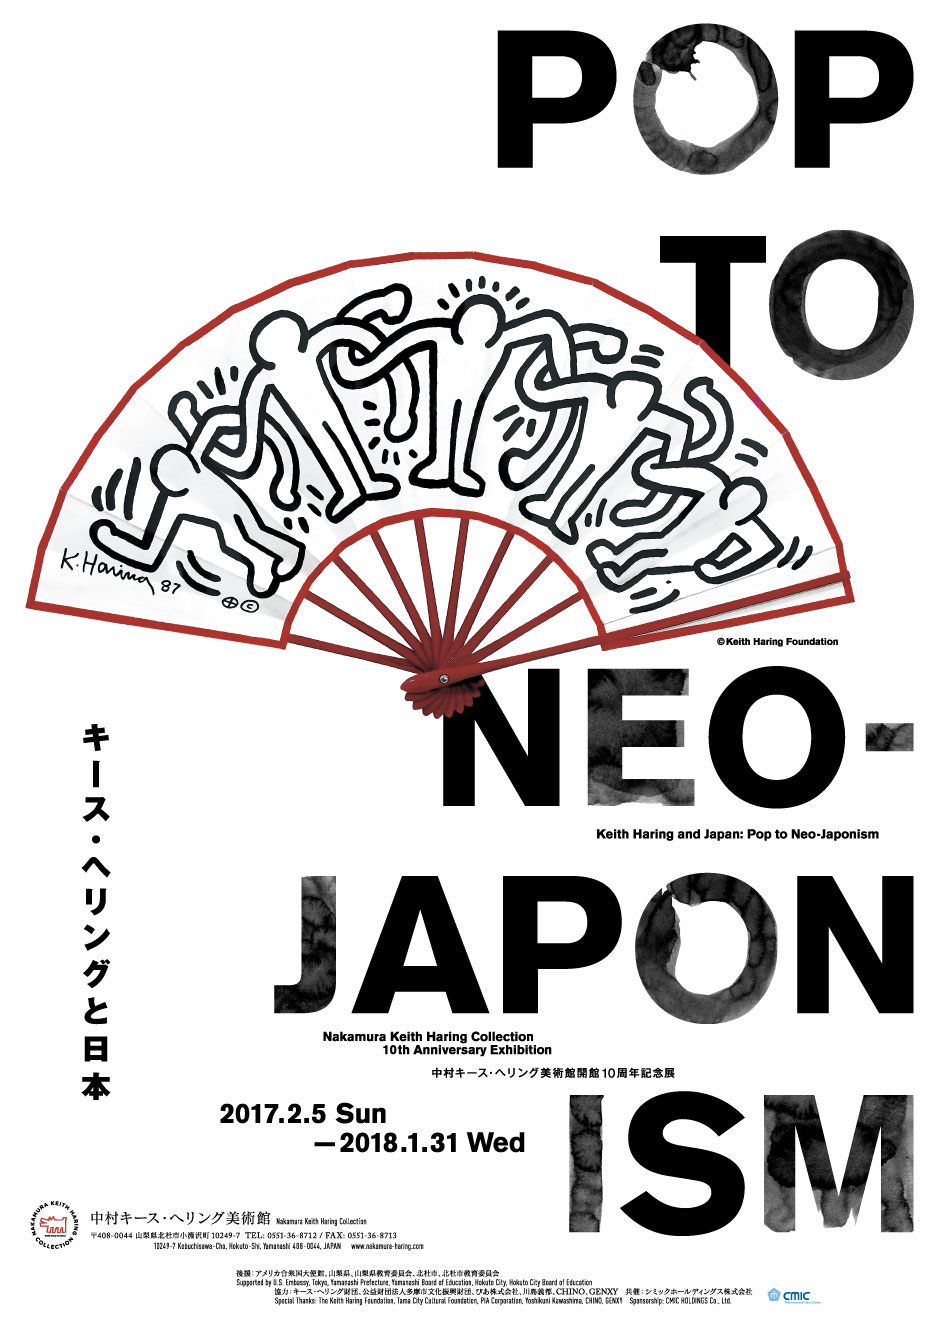 Photo of Pop to neo-japonism